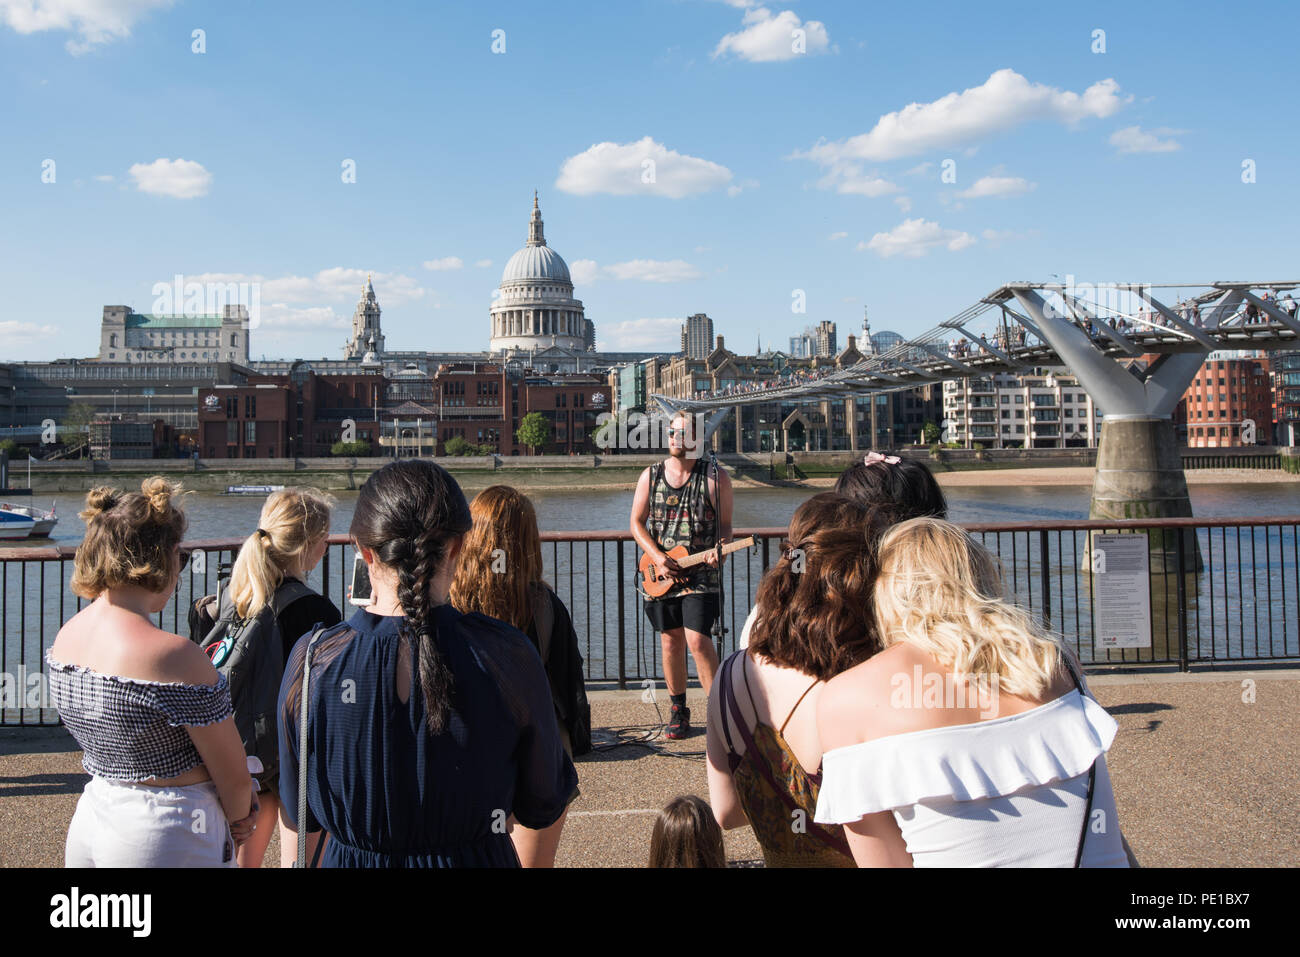 Street performance / Busker playing guitar with young girls audience on the London south bank with St.Pauls cathedral and Millennium bridge Stock Photo